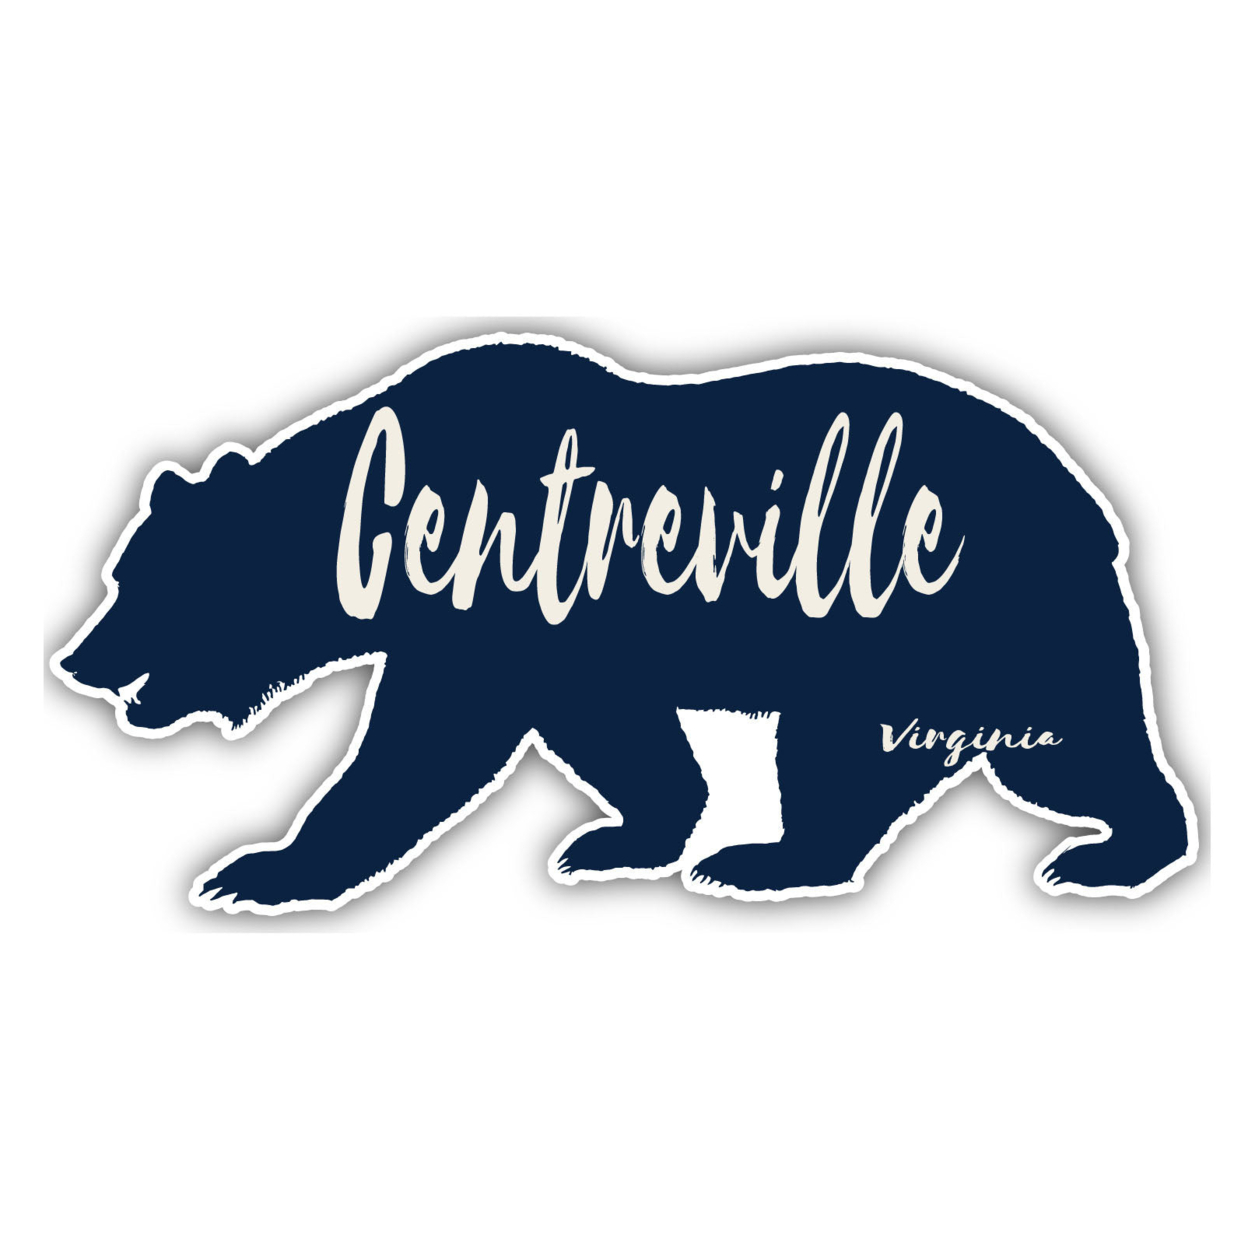 Centreville Virginia Souvenir Decorative Stickers (Choose Theme And Size) - 4-Pack, 4-Inch, Bear